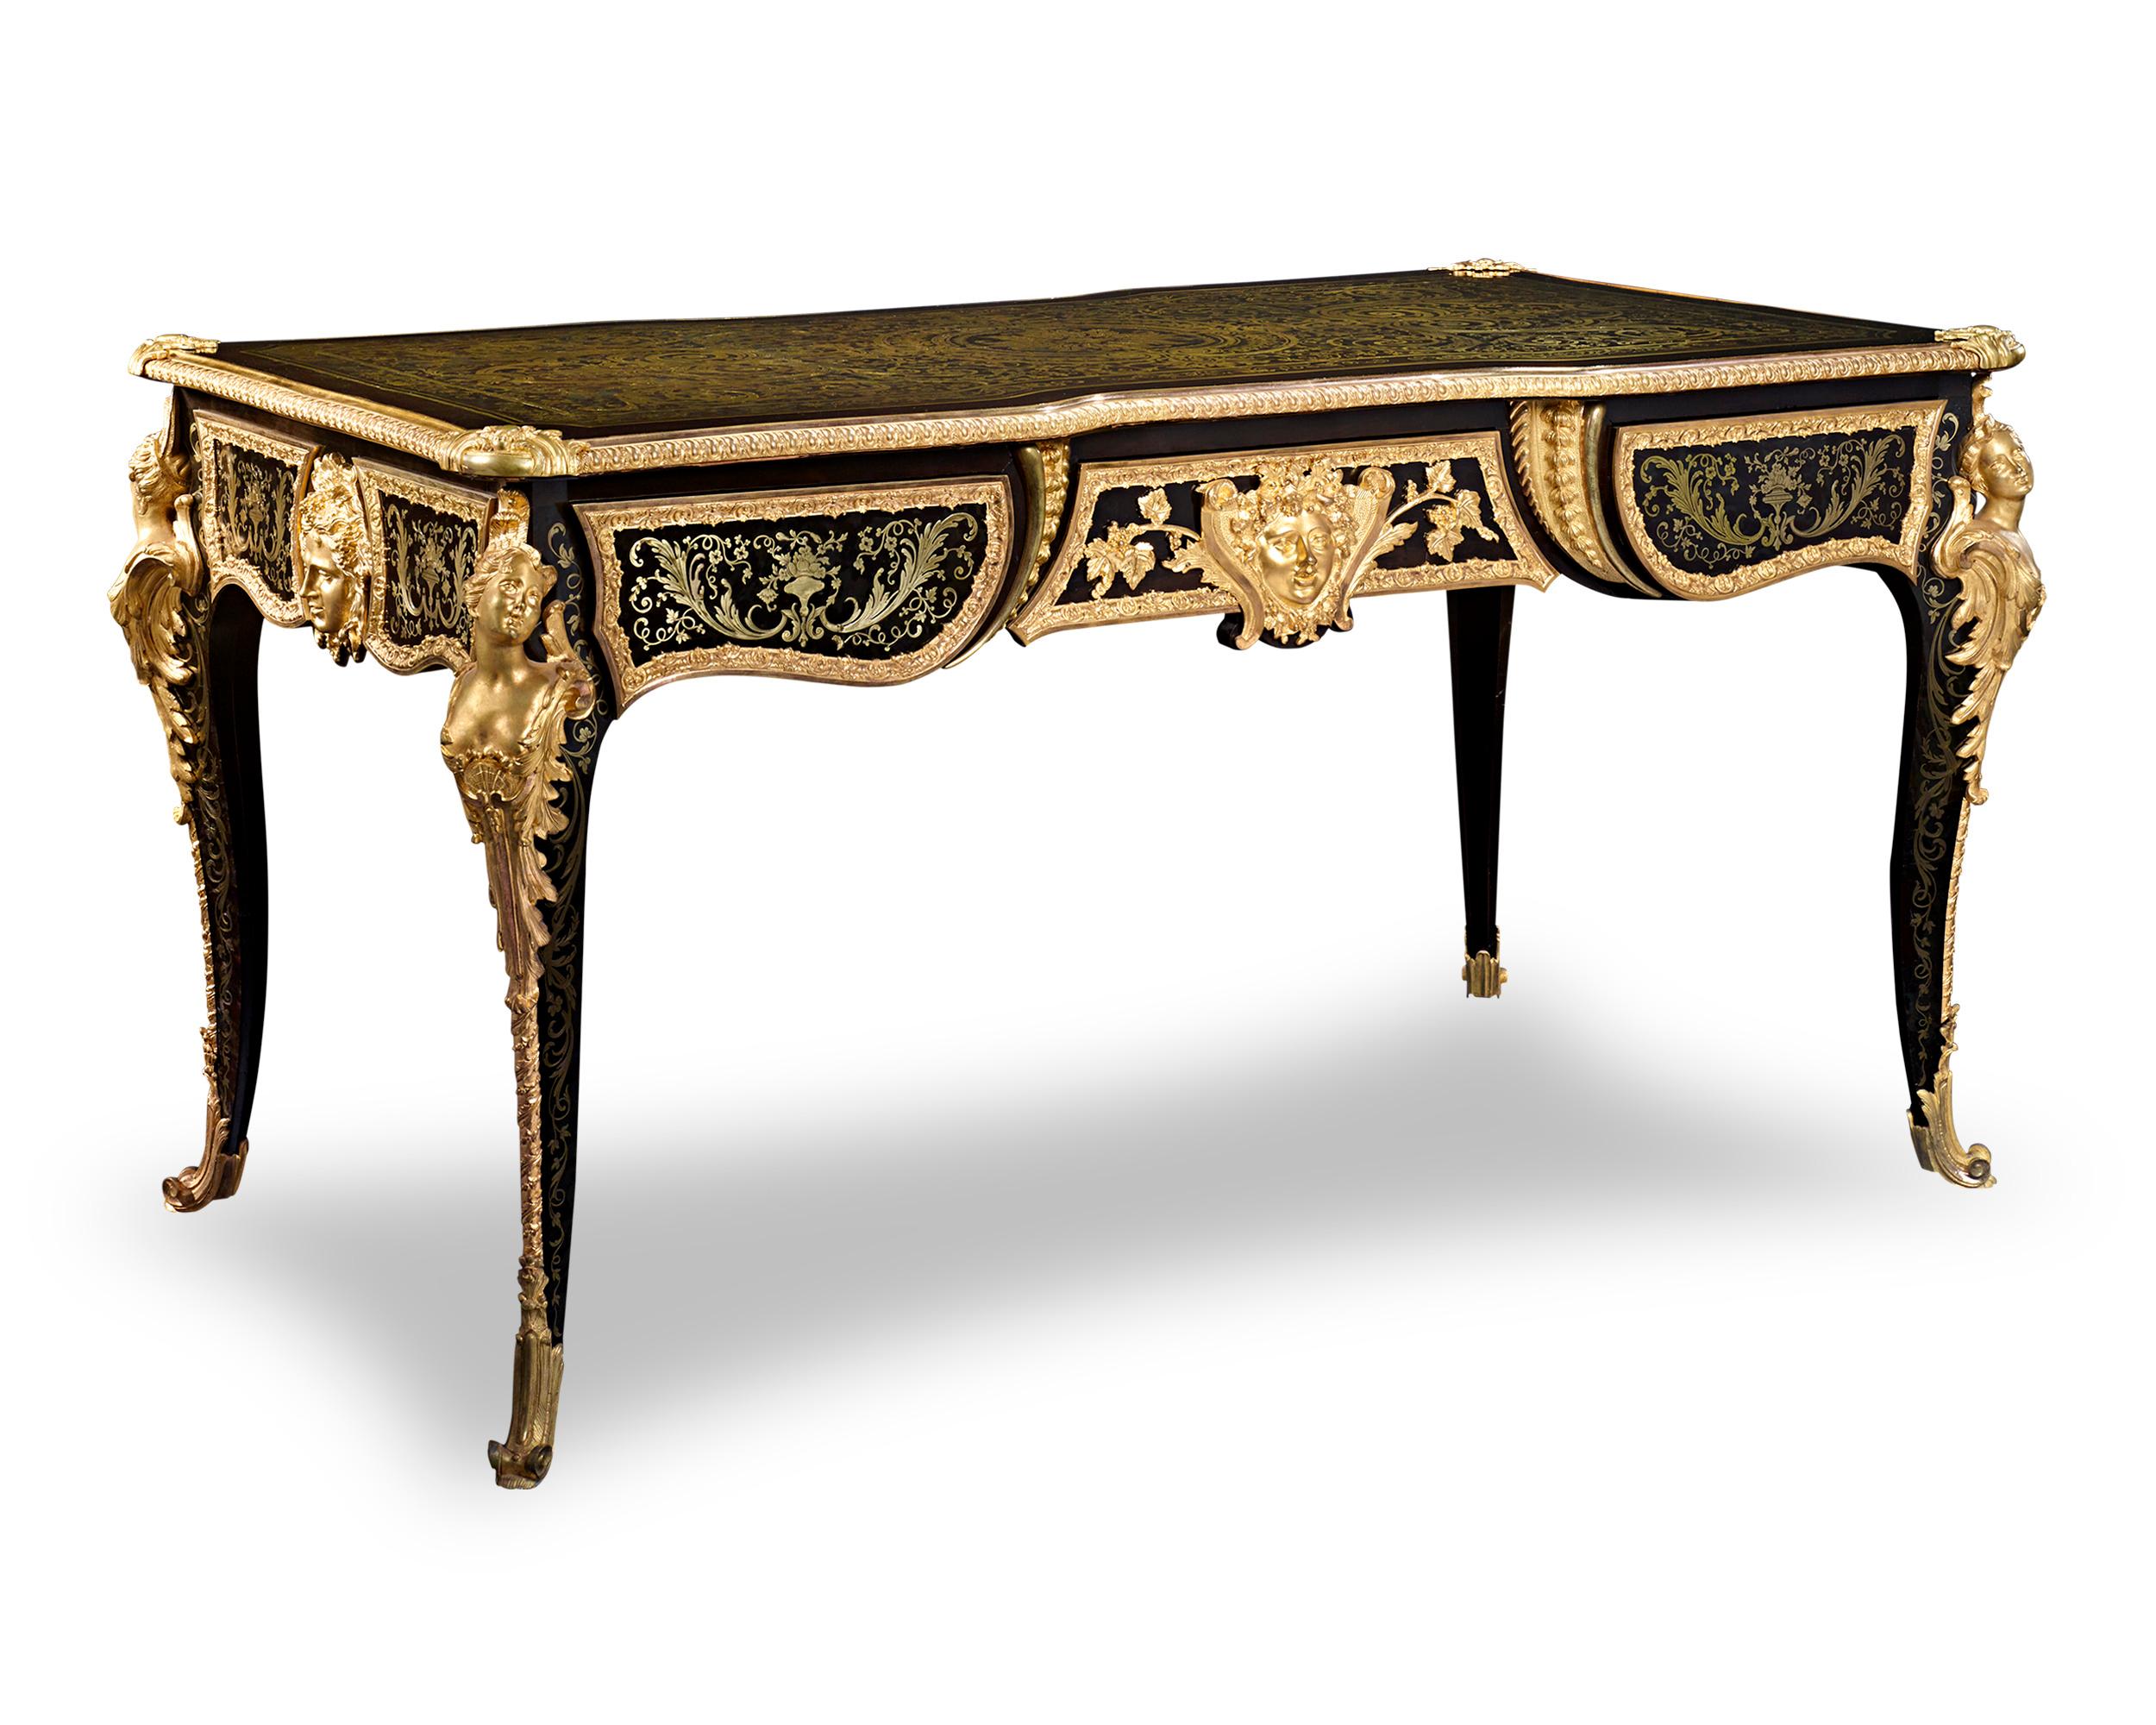 The elegance of Boulle marquetry is fully realized in this Louis XIV-style bureau plat, which represents the finest of 19th-century French furnishing. The writing table is clearly based upon a celebrated prototype by the renowned ébénistes Mathieu